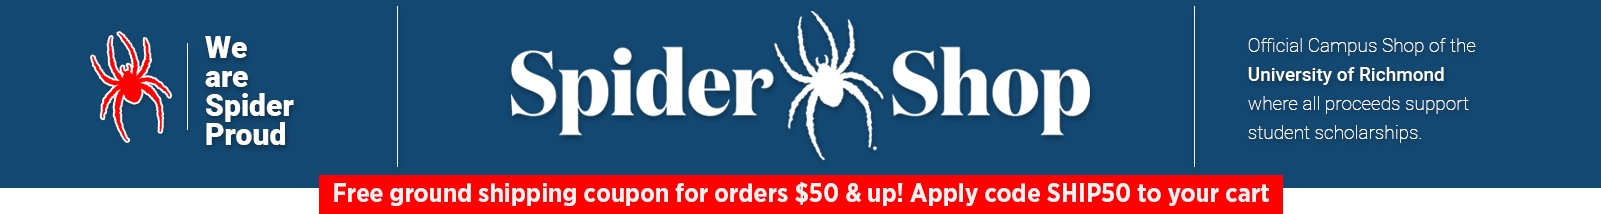 We are spider proud at the SpiderShop the official Campus Shop of University of Richmond!